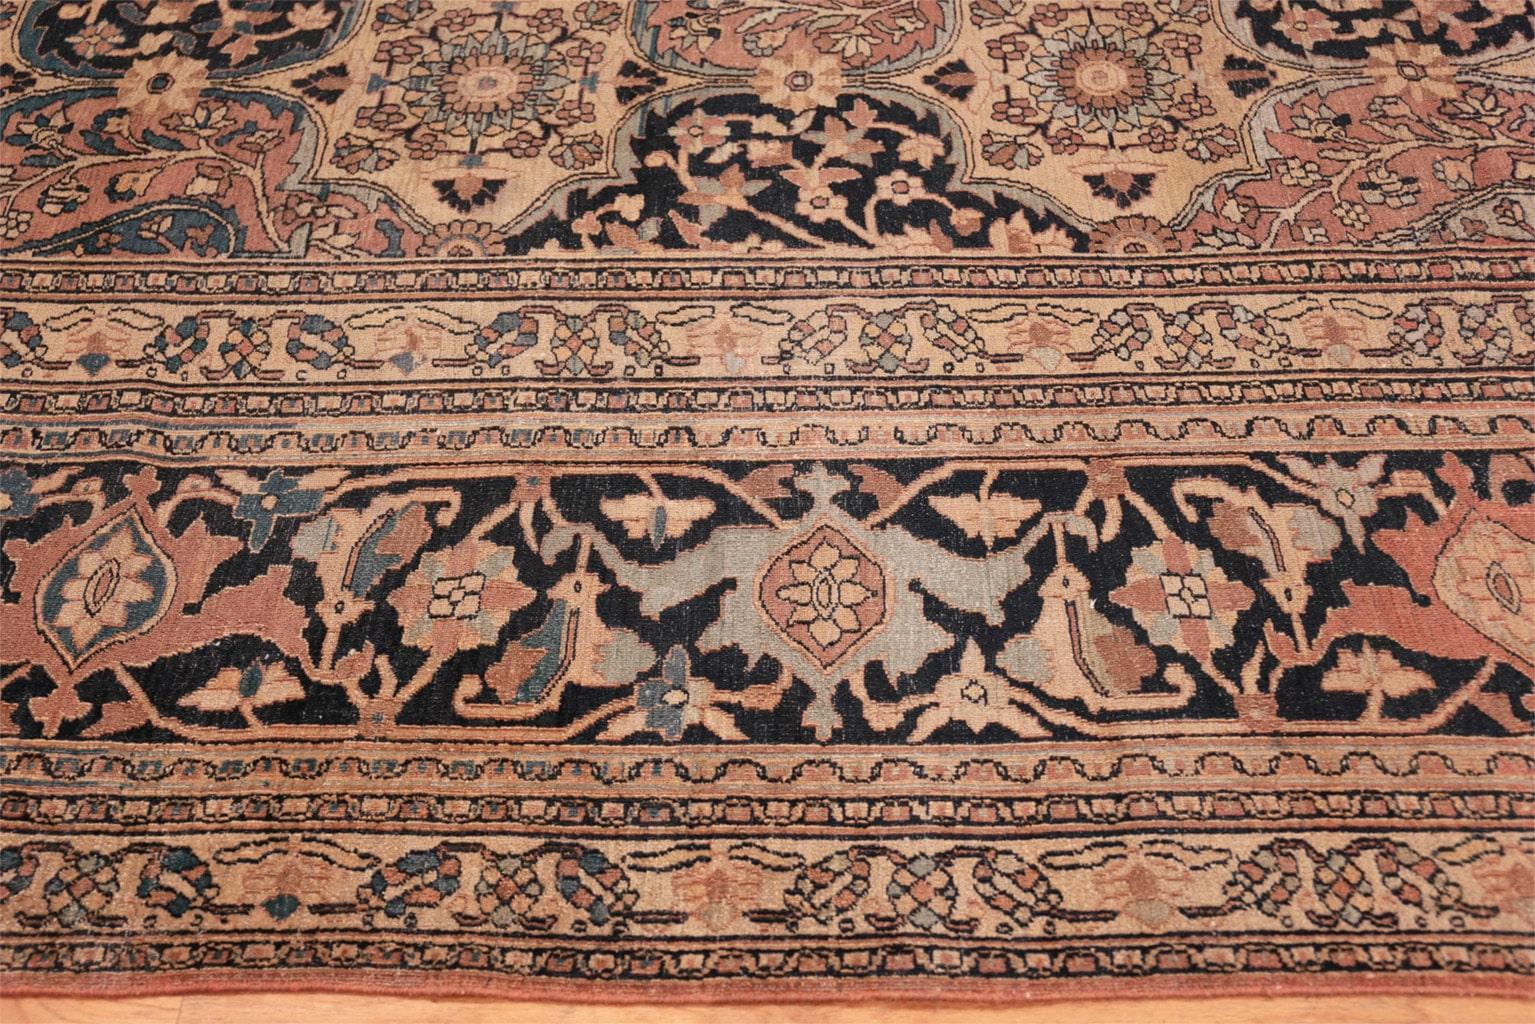 Antique Persian Khorassan Rug, Country of Origin: Persia, Circa Date: 1900– Size: 12 ft 4 in x 15 ft 9 in (3.76 m x 4.8 m)

